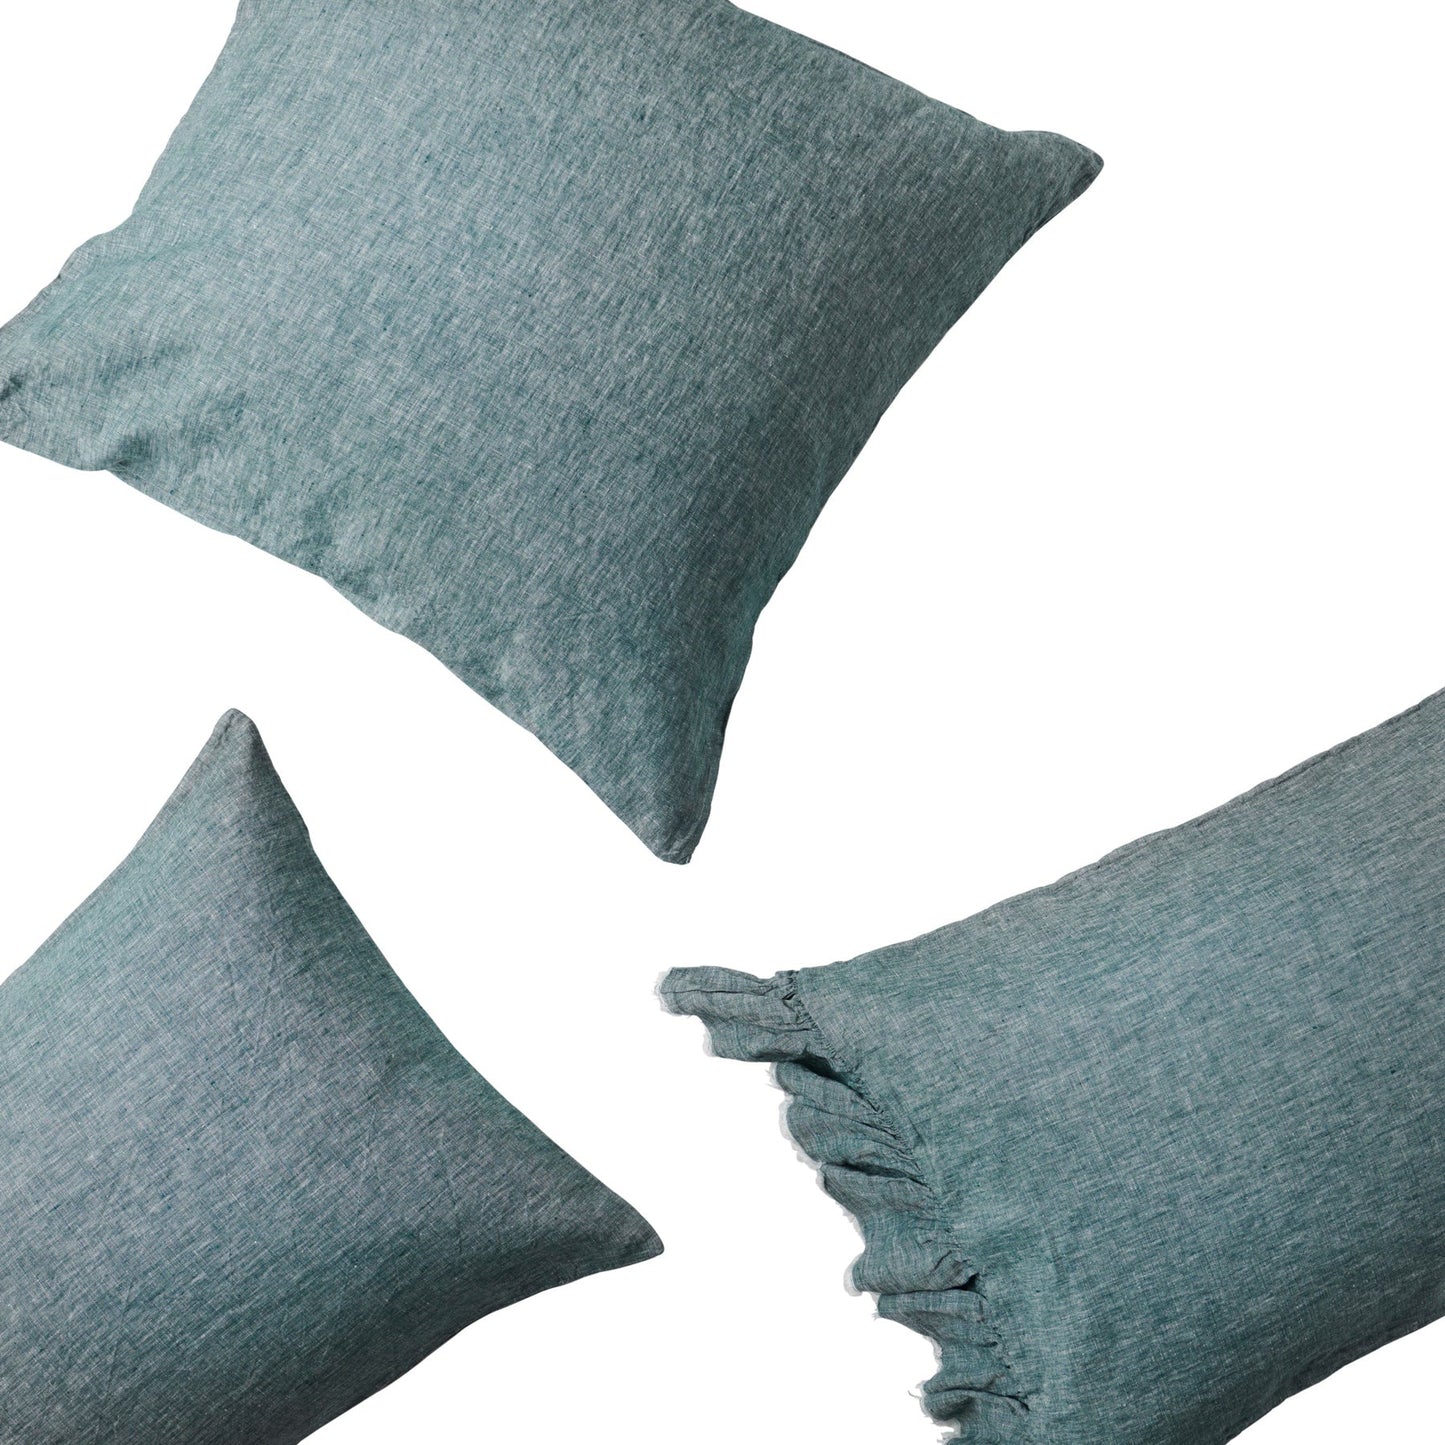 SOW spruce marl linen pillowcase set with ruffle